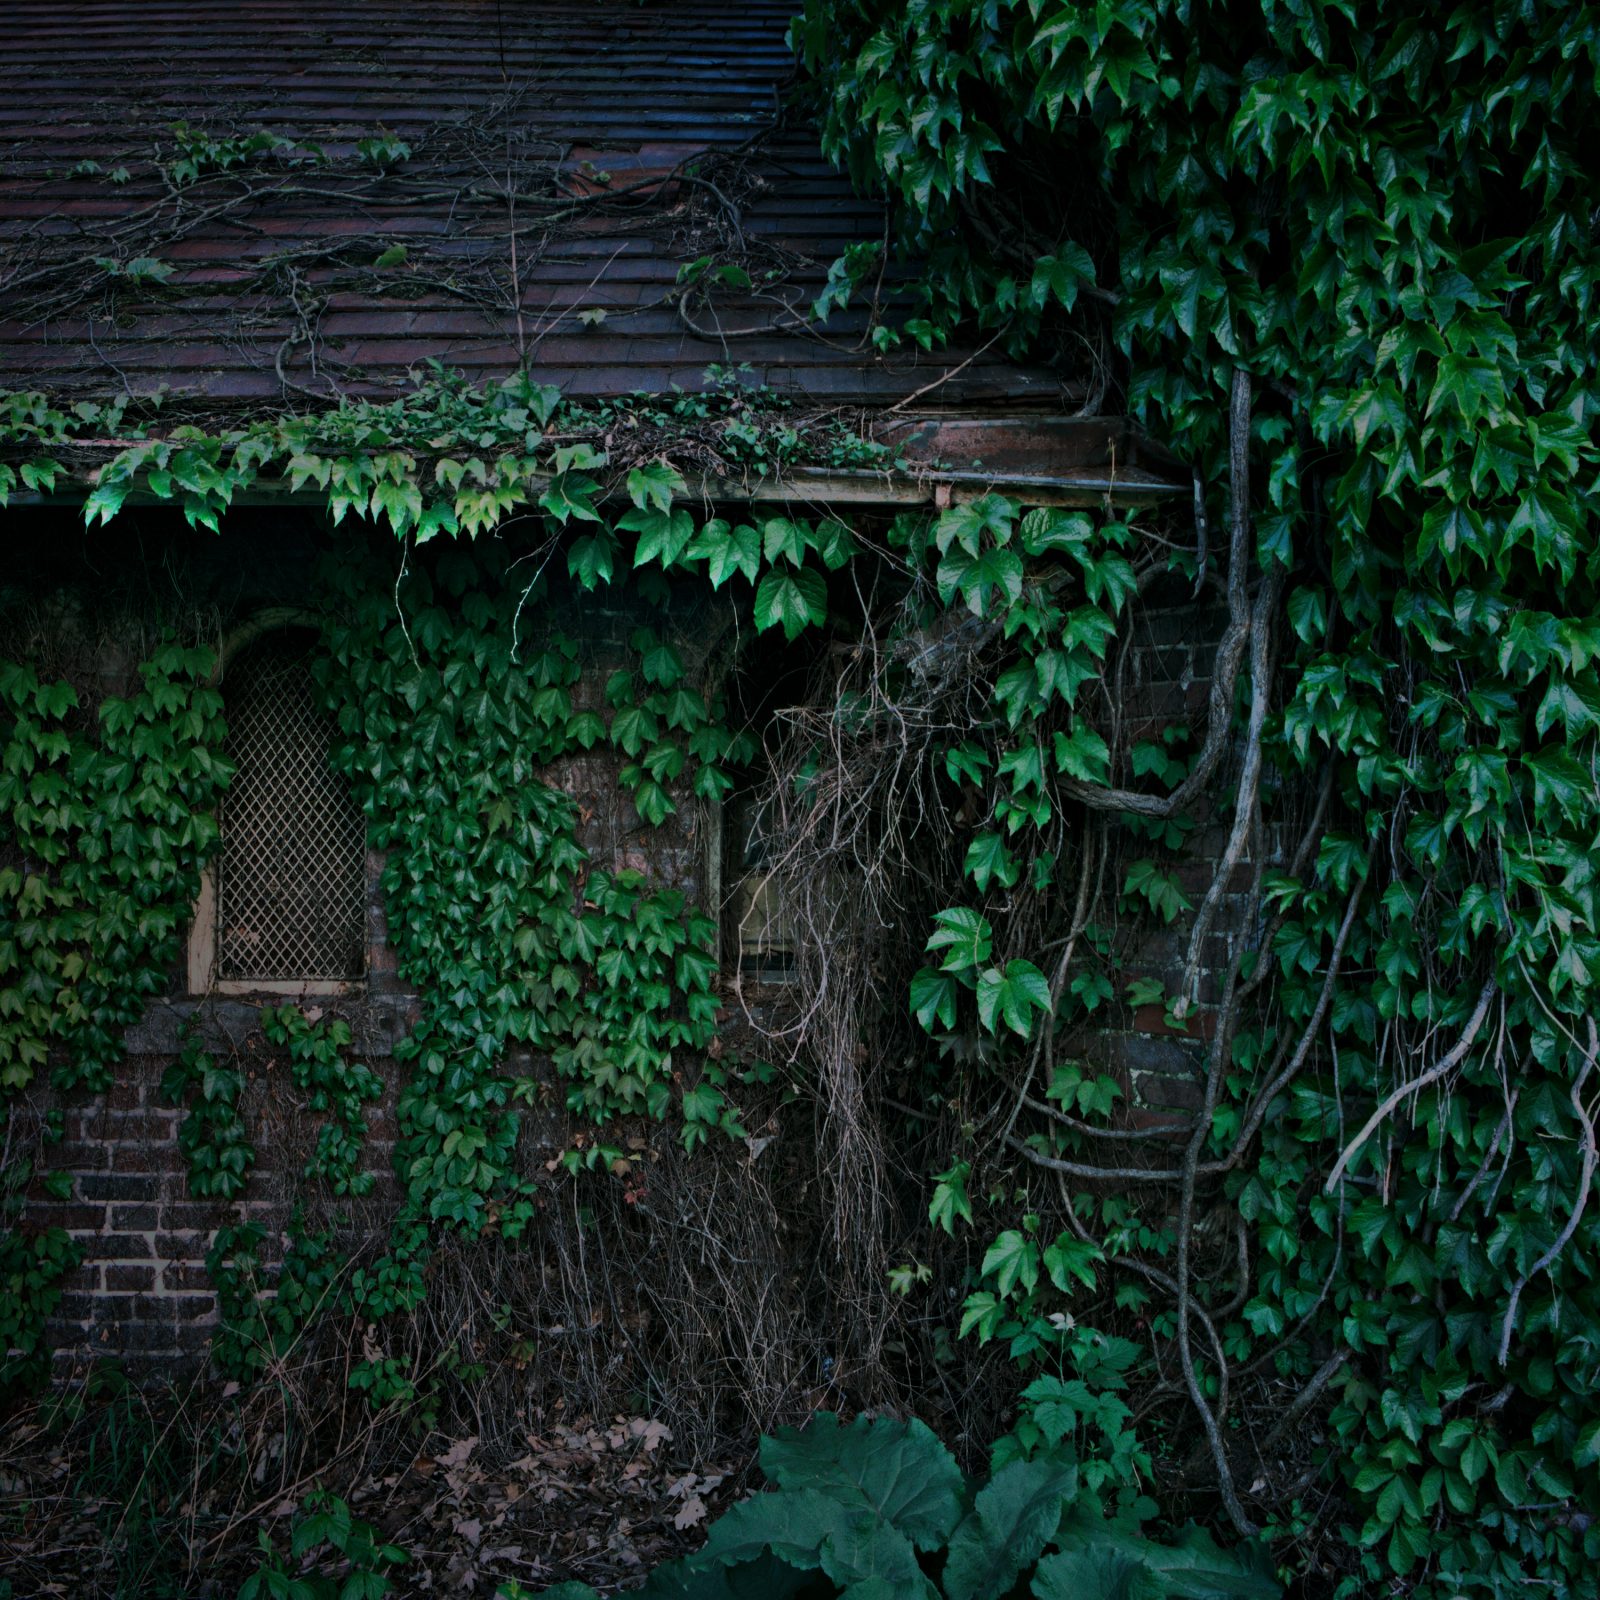 Abandoned, ivy covered building on Belle Isle. Detroit, Michigan.